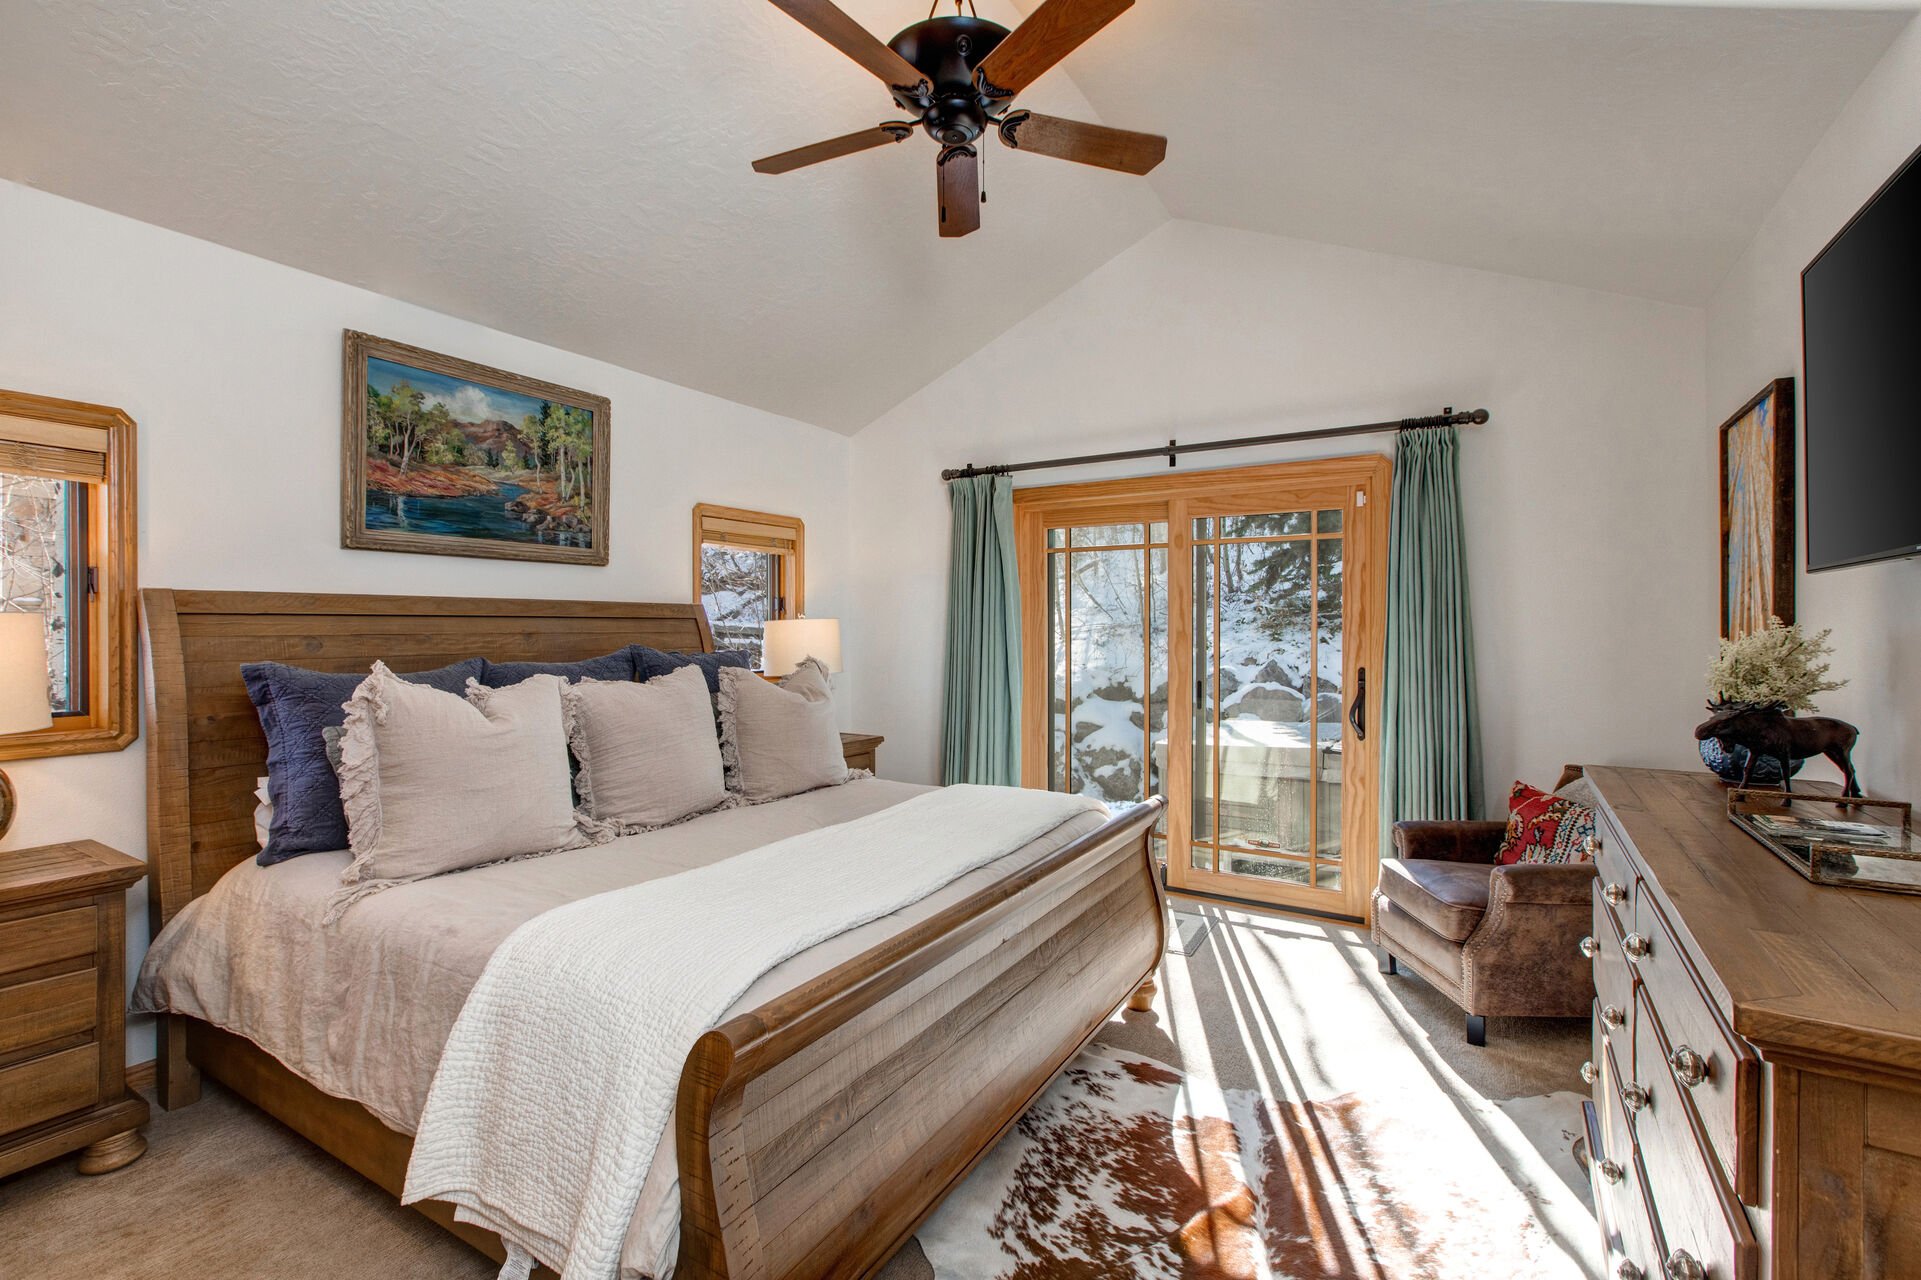 Grand Master Bedroom with King Bed, Smart TV, Private Patio and Hot Tub, and Full Private Bath